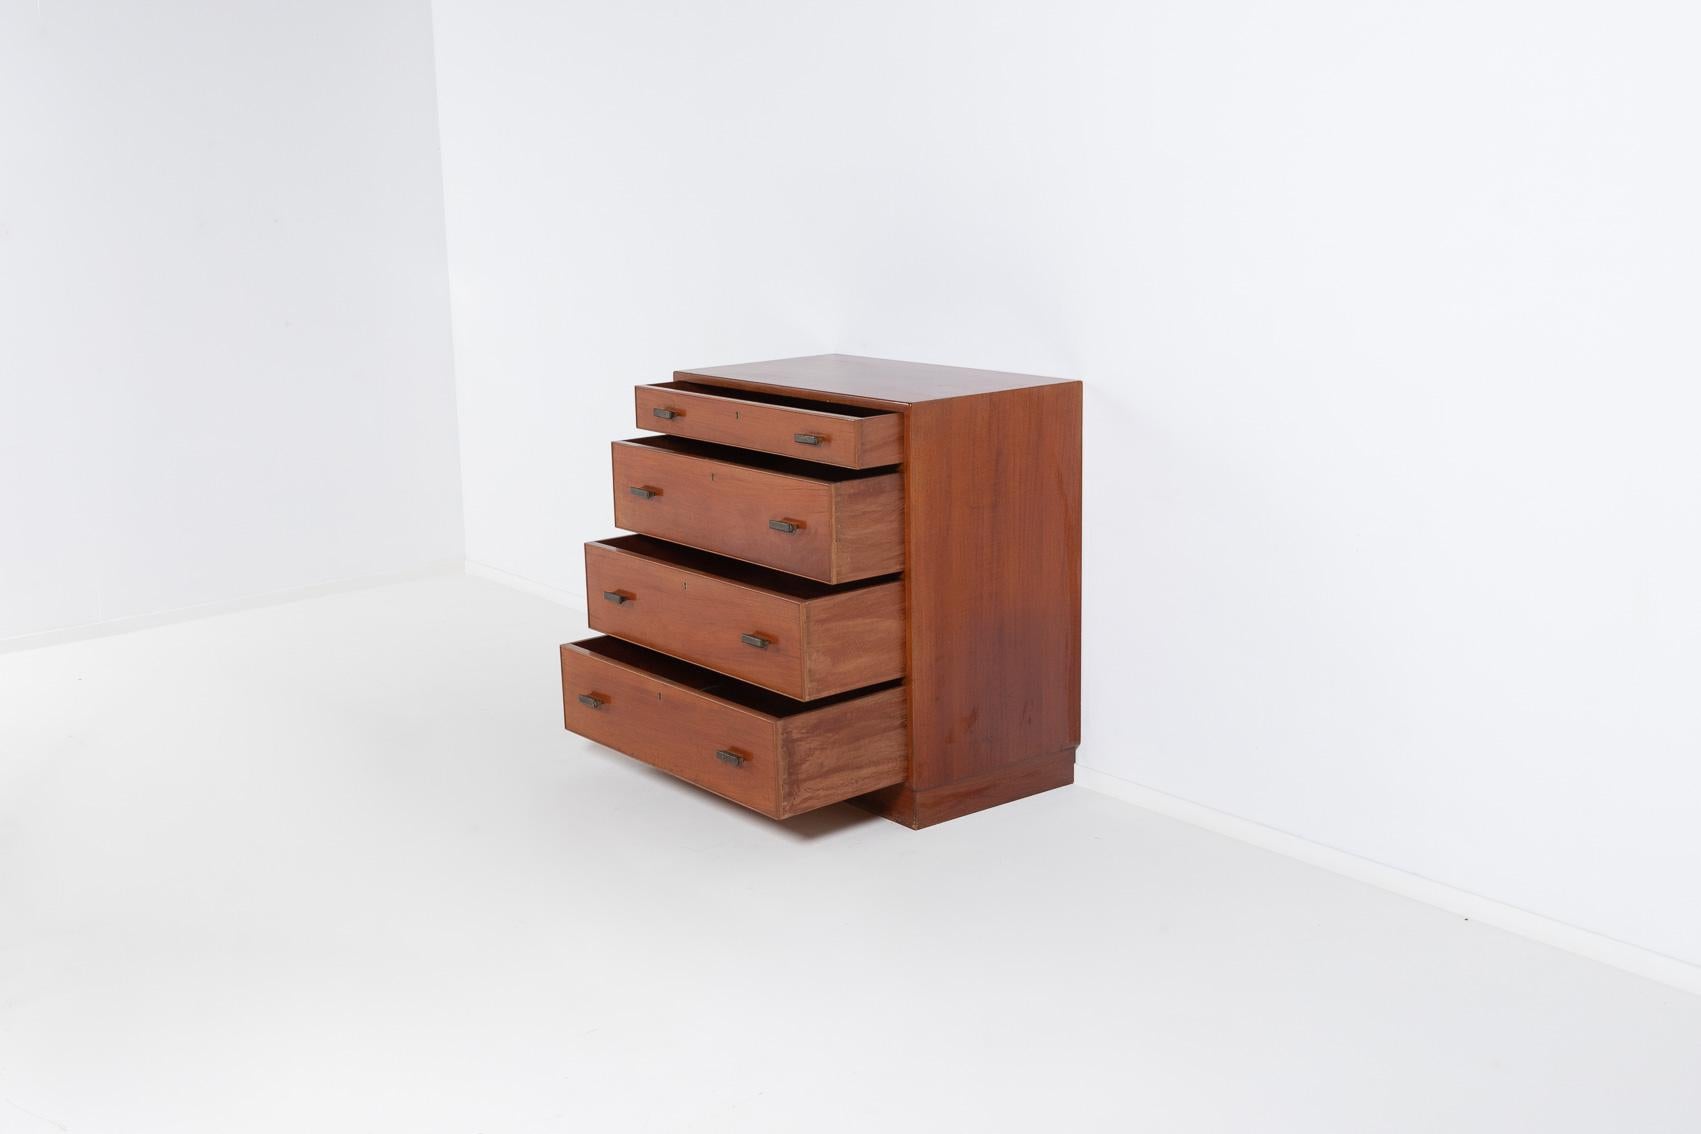 Beautiful chest of drawers in varnished mahogany produced by Rud. Rasmussens. Exceptional Scandinavian craftsmanship.

Condition
Good, age related wear and marks

Dimensions
height: 89 cm
width: 83 cm
depth: 48 cm